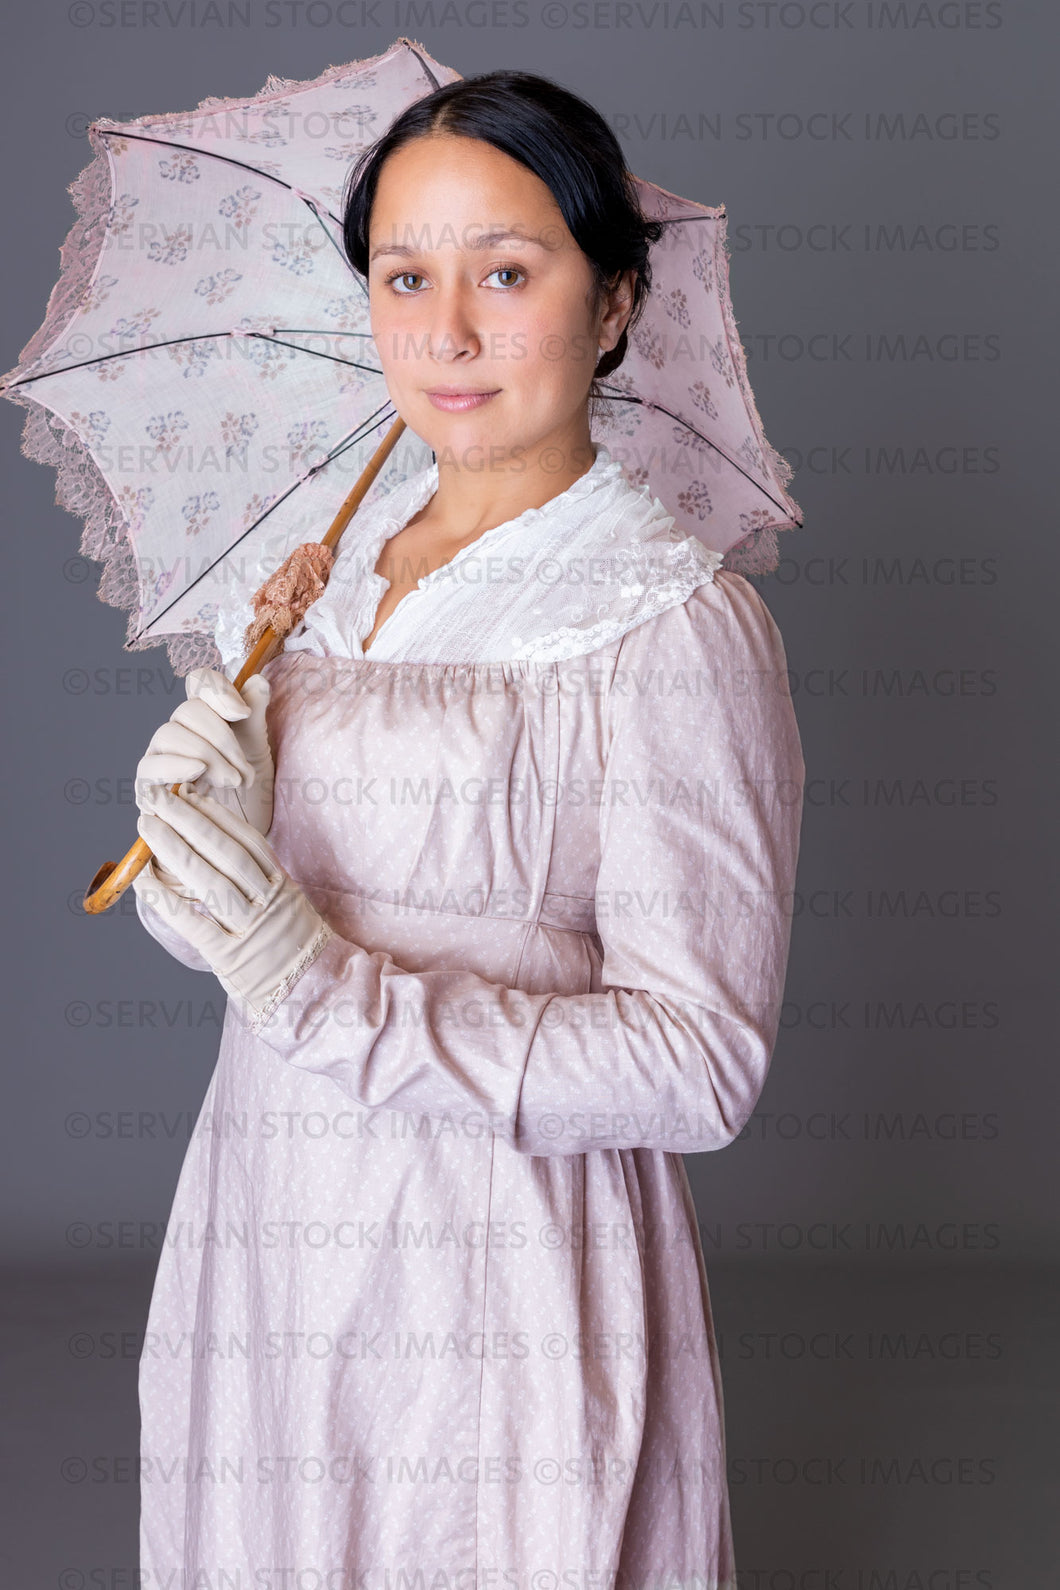 Regency woman wearing a cotton dress with a lace modesty shawl (Sylvia 5932)